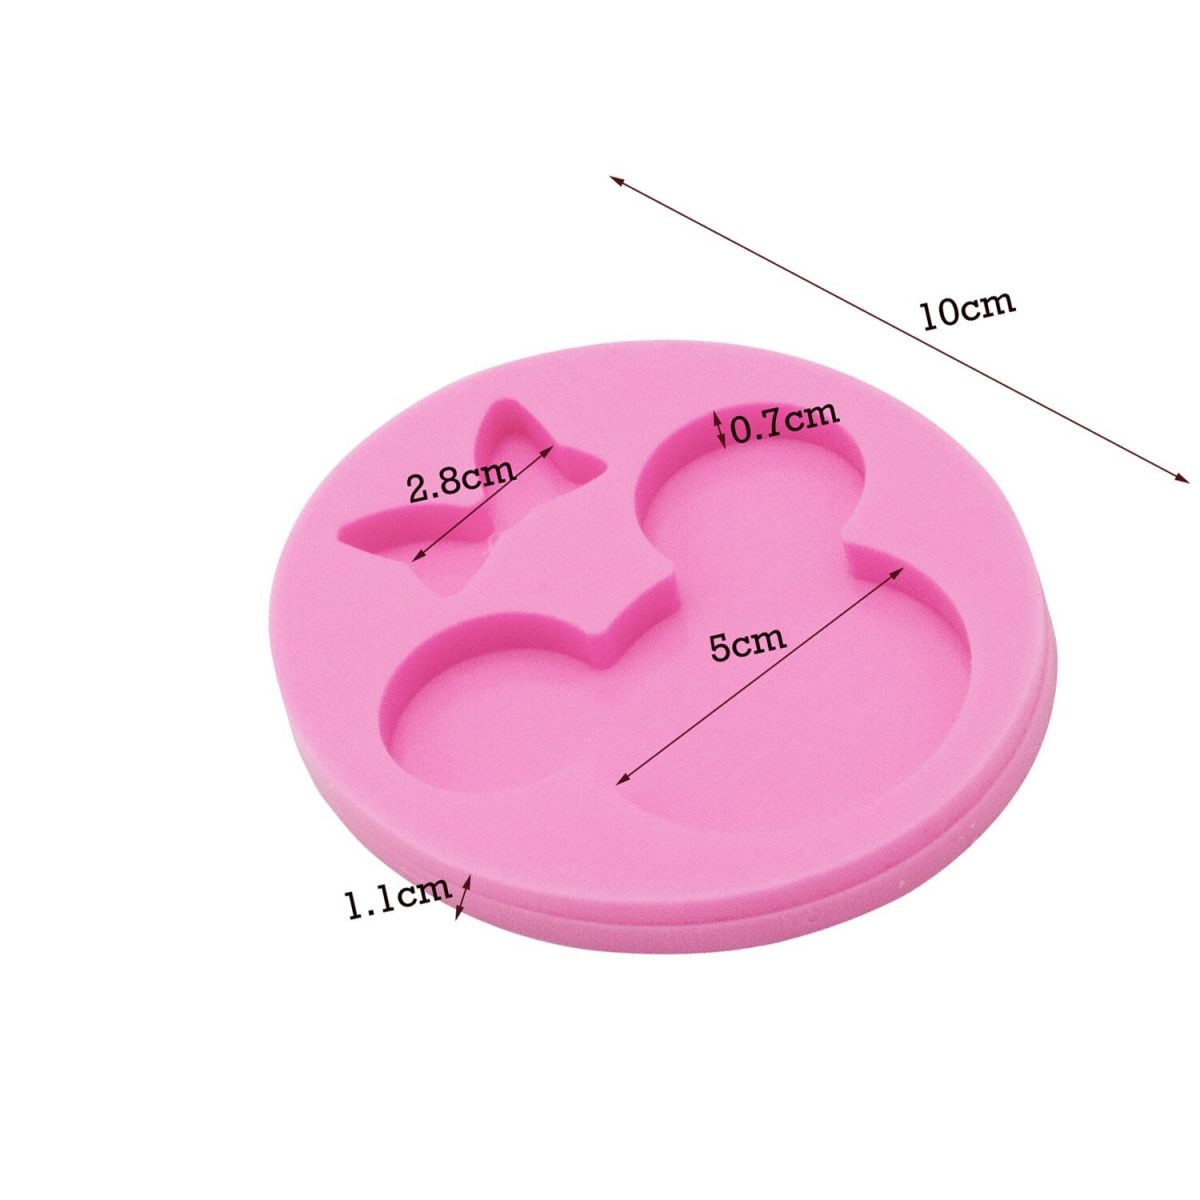 DY0075 Shiny 1.57/1.96 inches Mouse Bow silicone mold cake decorating tools resin gumpaste Fondant Sugar Craft Molds DIY Cake